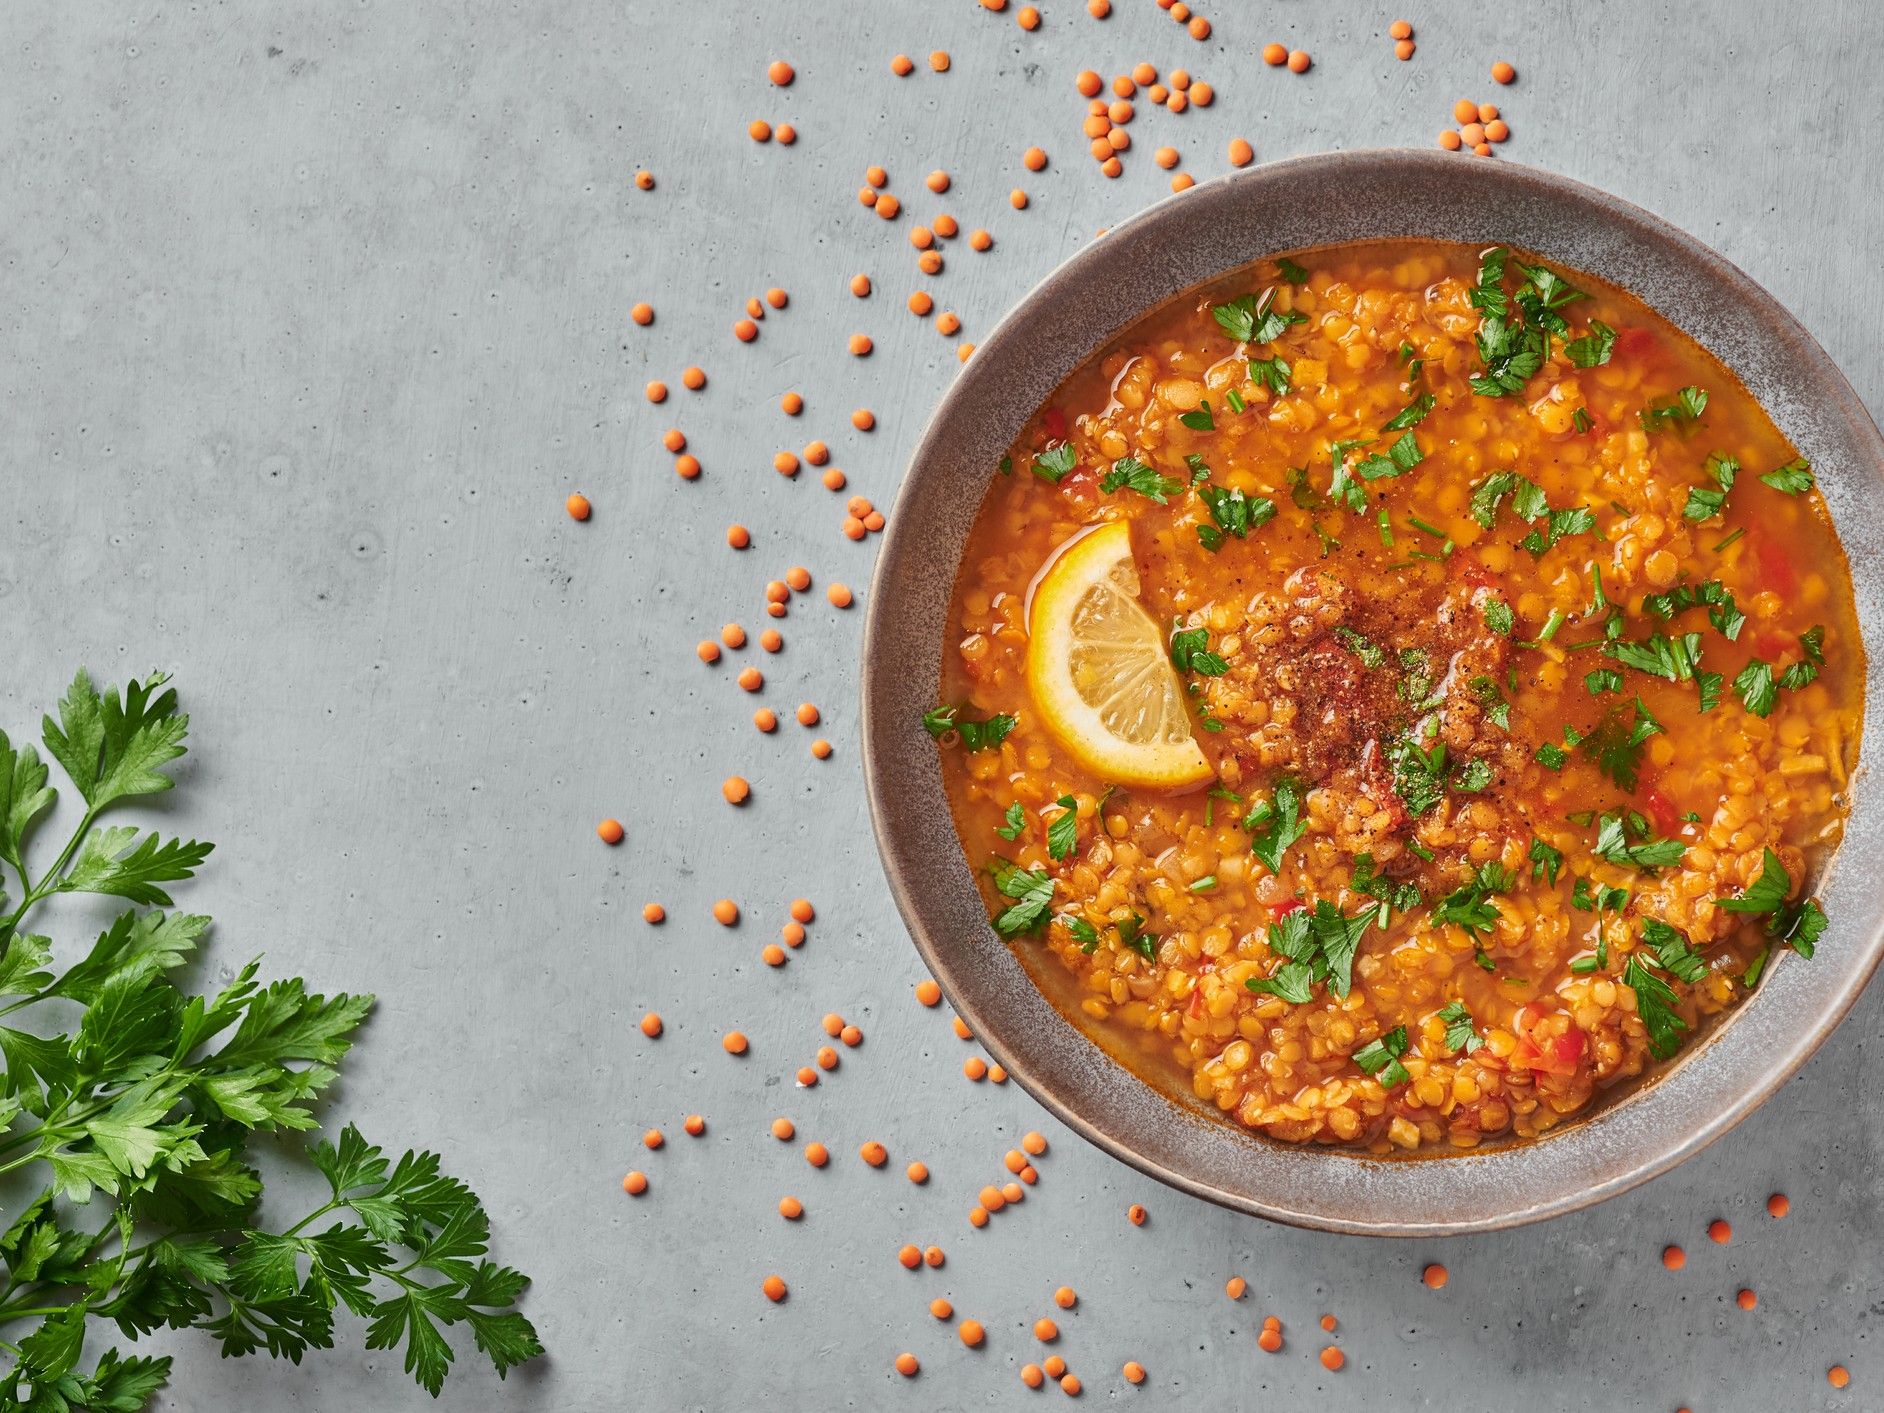 Can eating lentils improve my mental health?